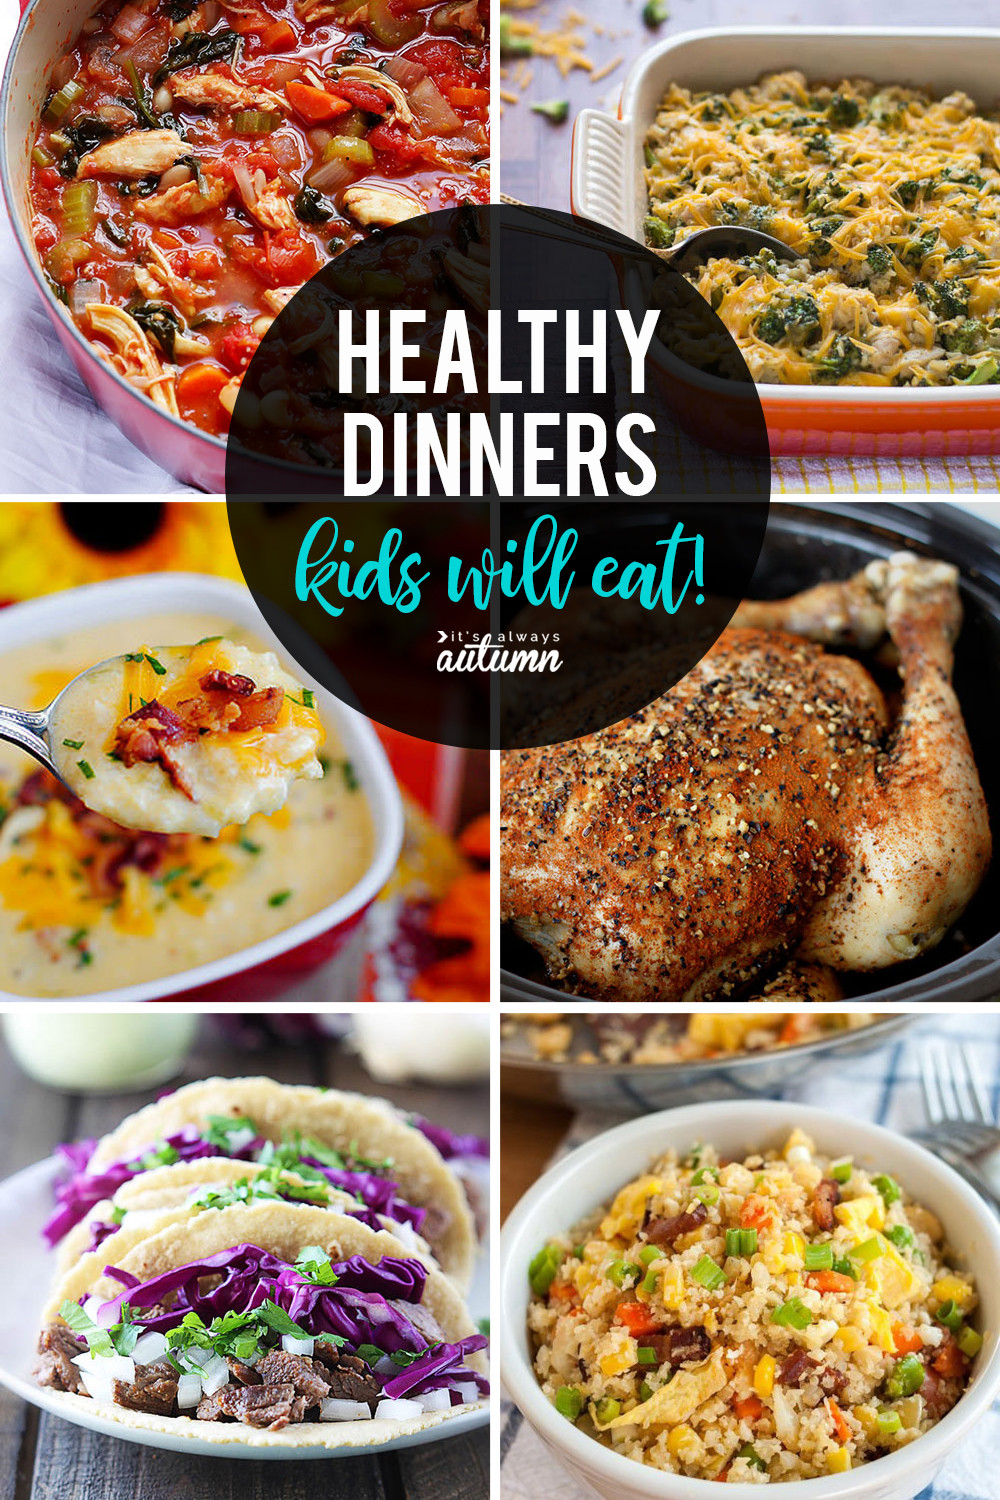 Easy Dinner Recipes For Kids
 20 healthy easy recipes your kids will actually want to